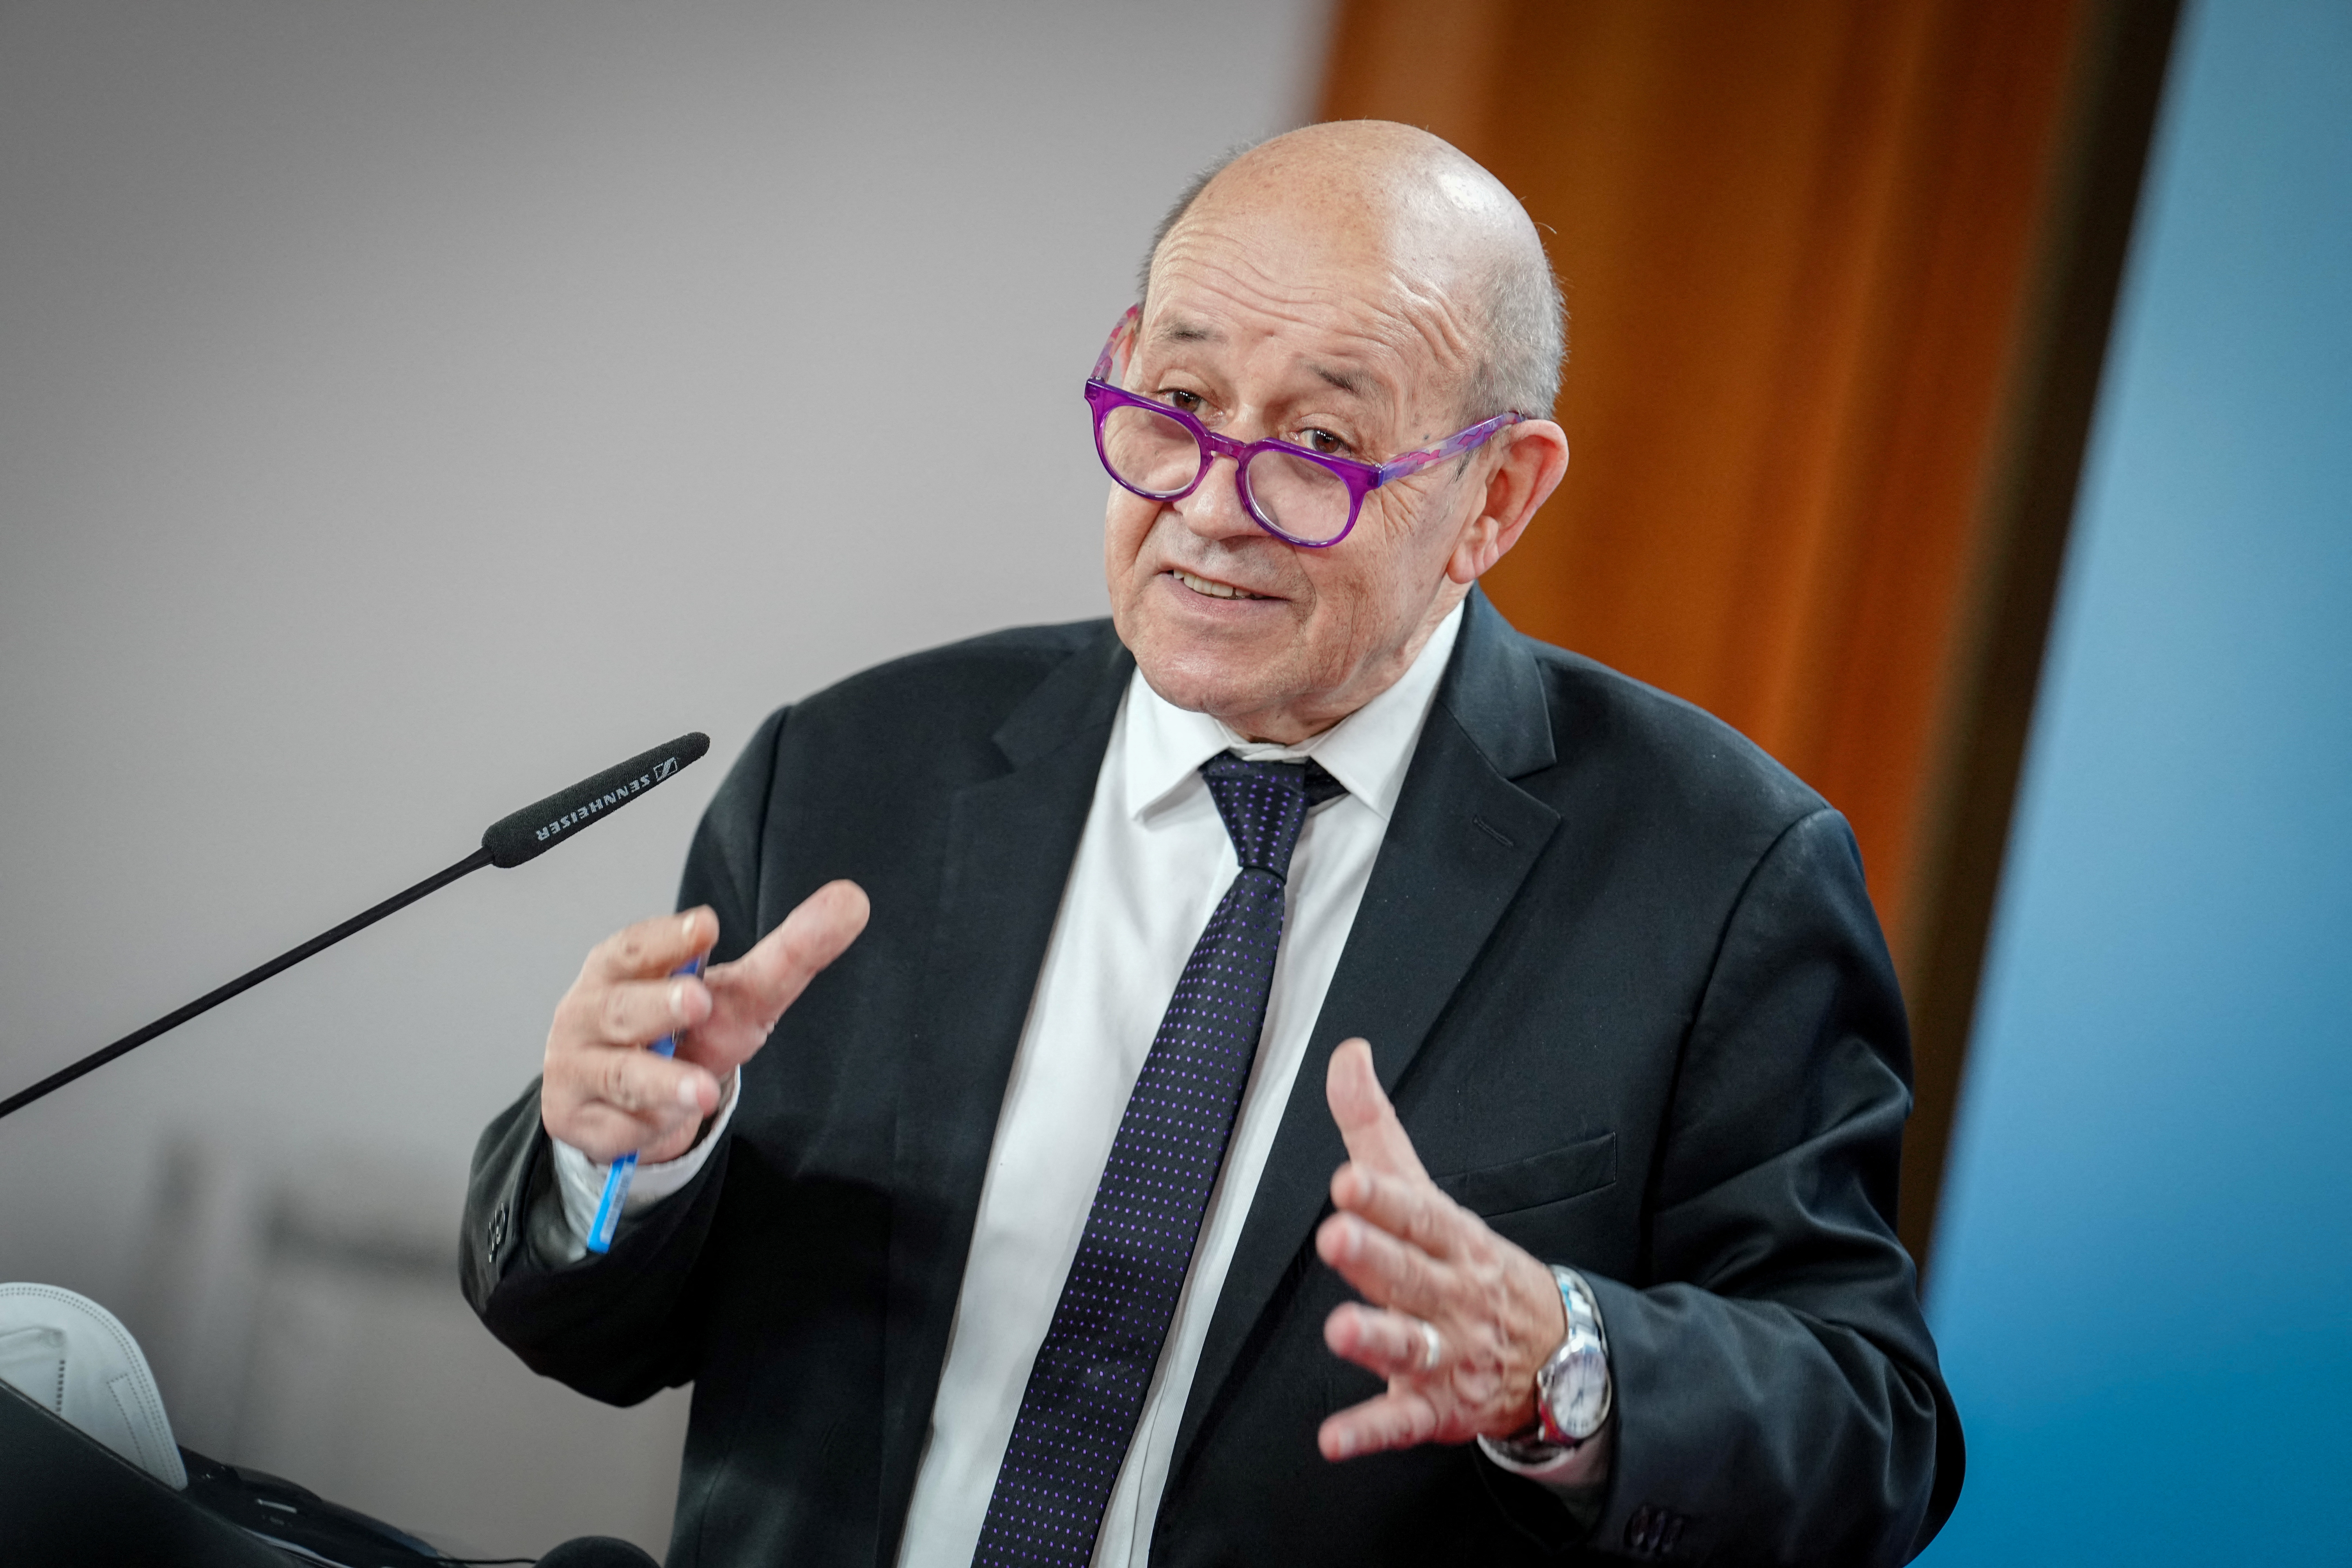 German FM Baerbock and French counterpart Le Drian news confererence in Berlin